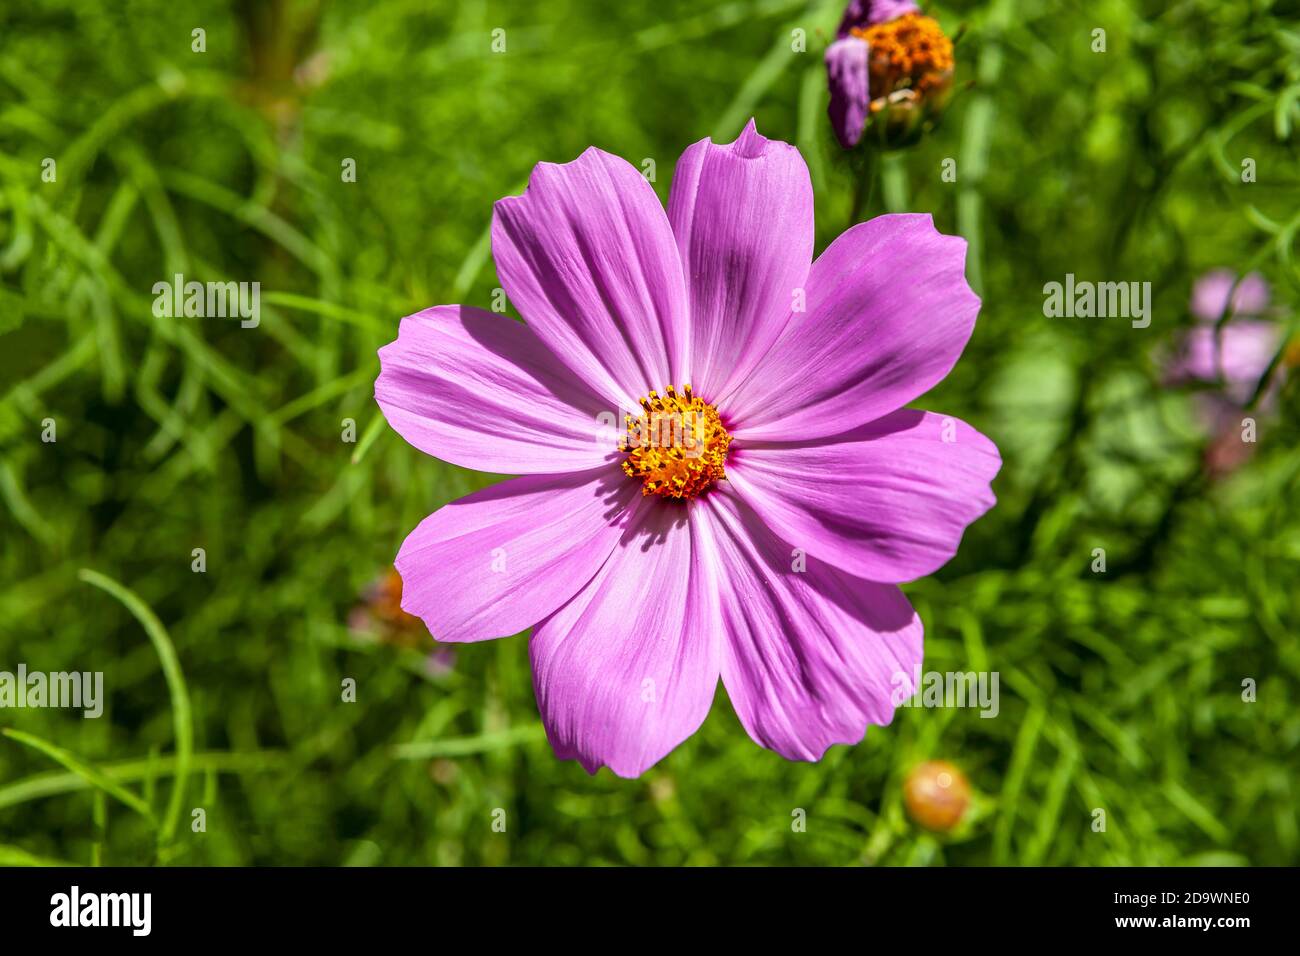 Detailed view of a colorful vibrant pink Cosmos flower Stock Photo